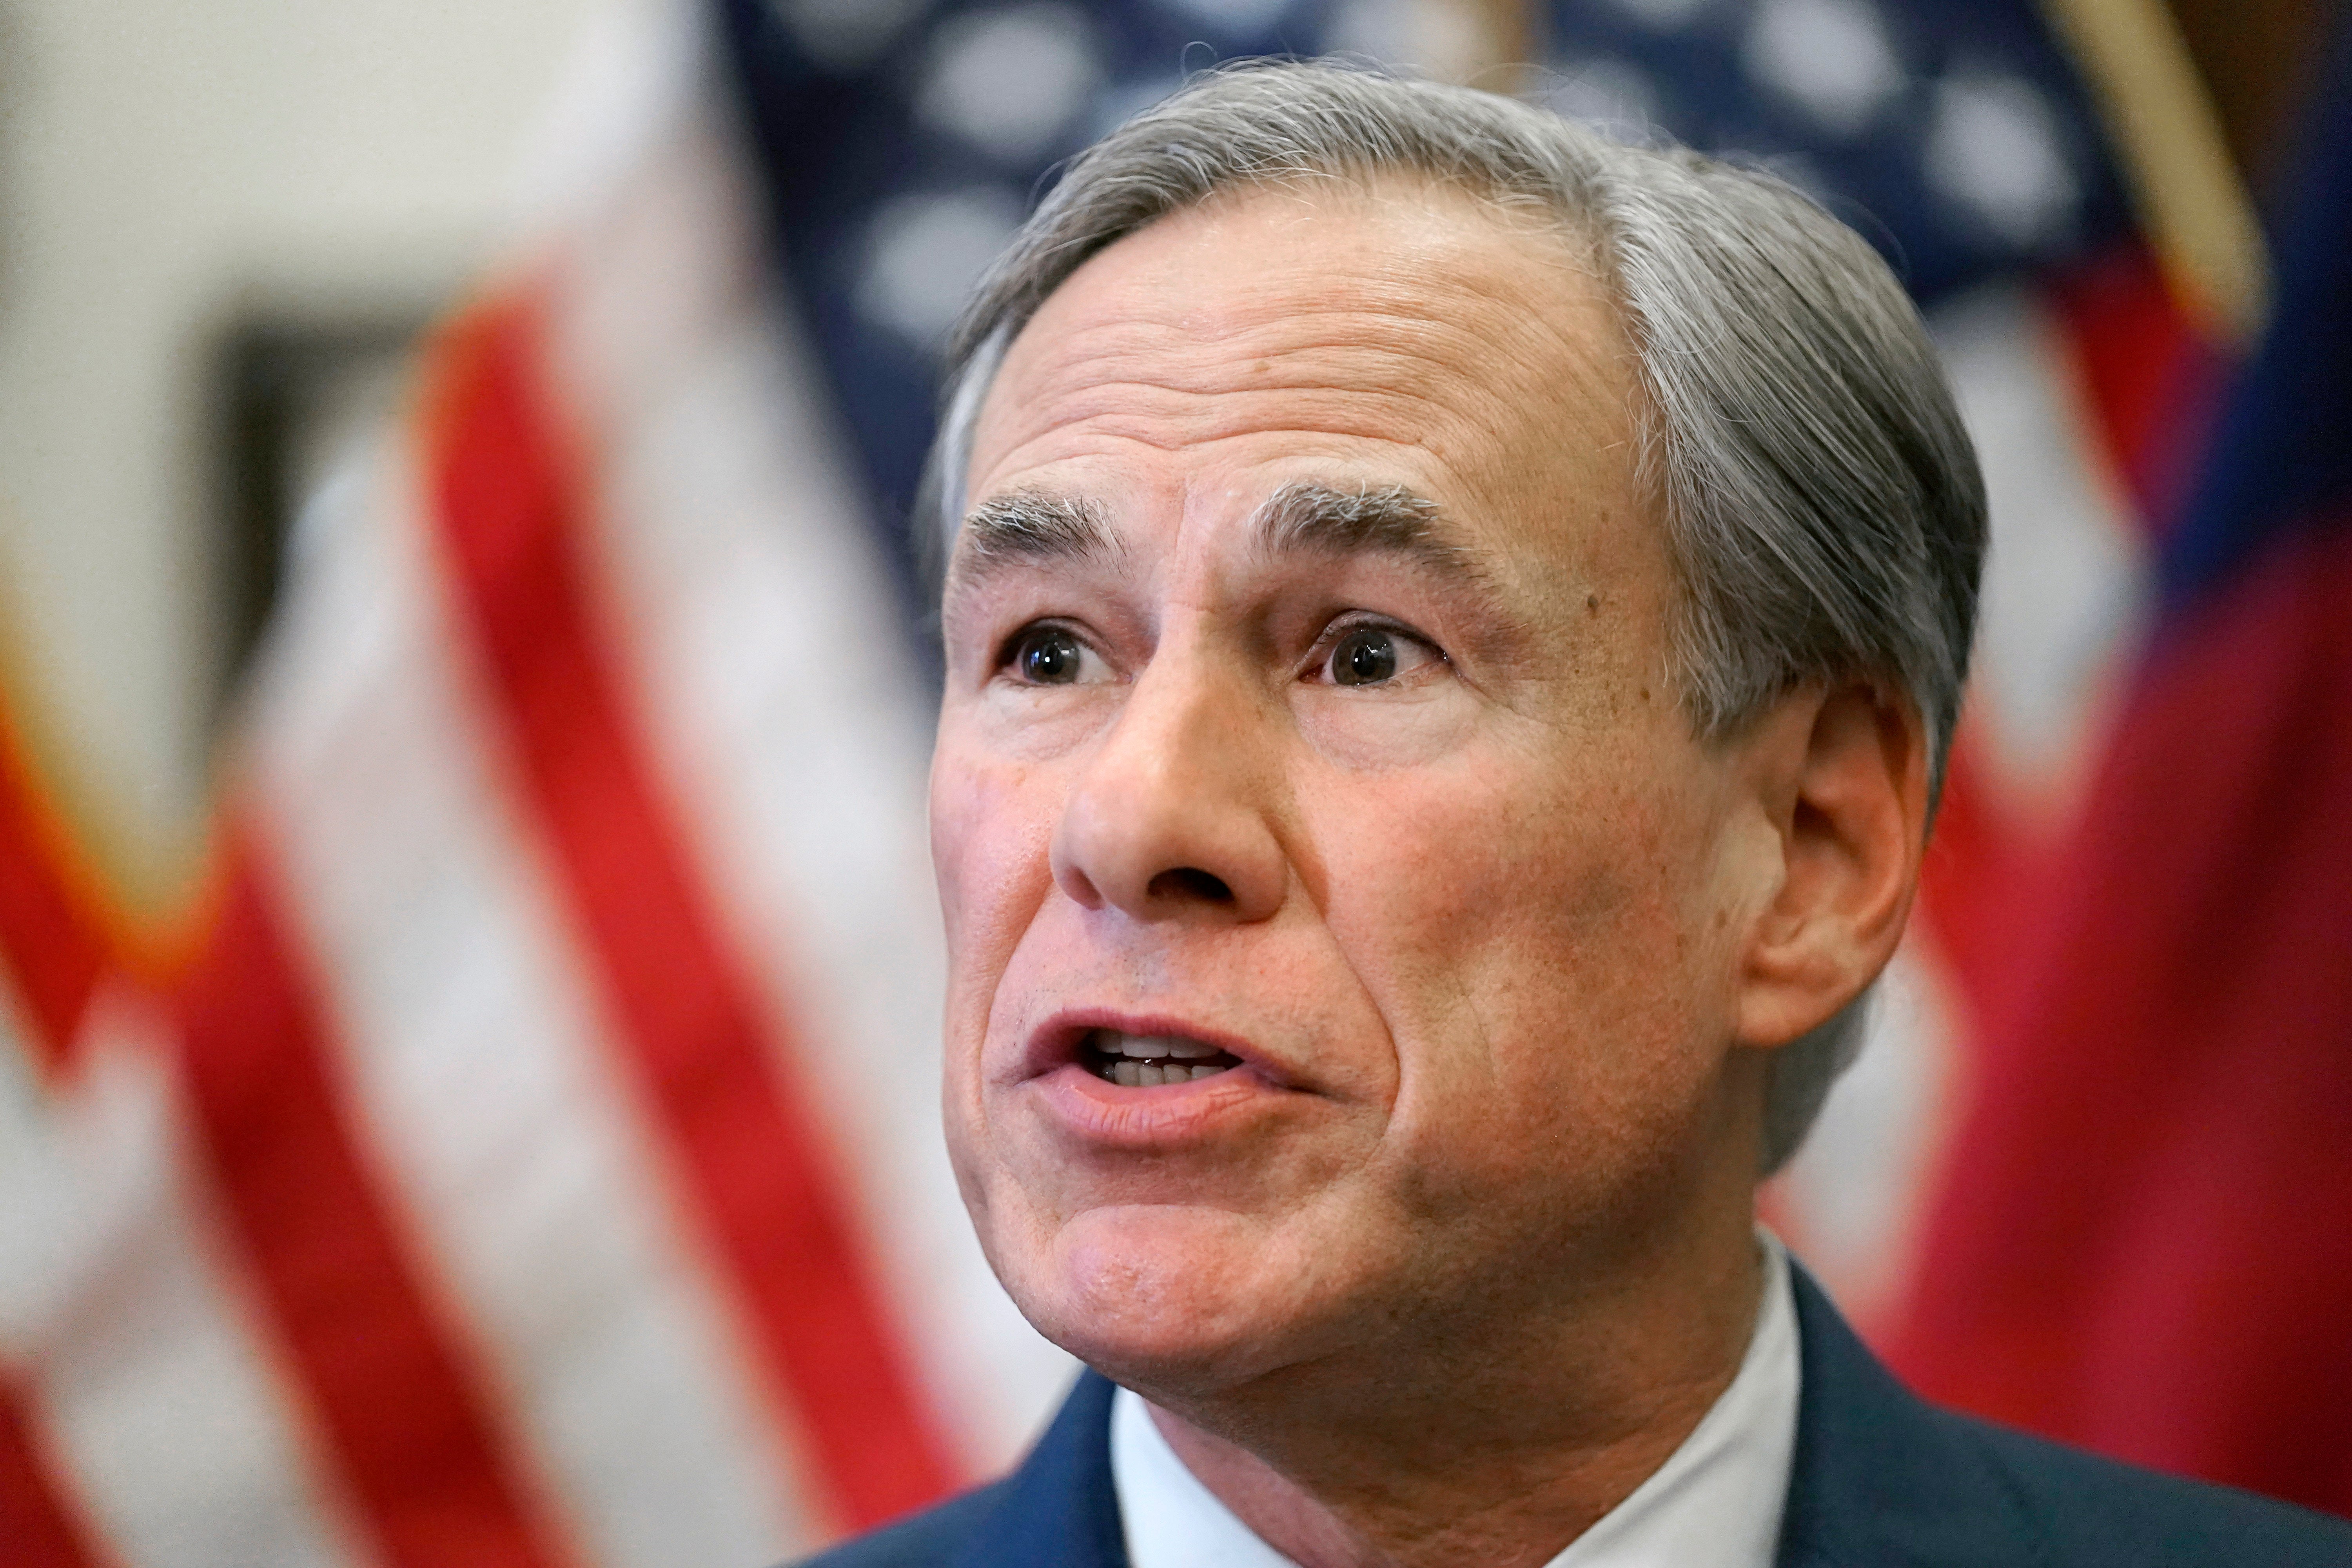 Texas governor Greg Abbott has pledged to investigate gender affirmation treatments for minors as ‘child abuse’